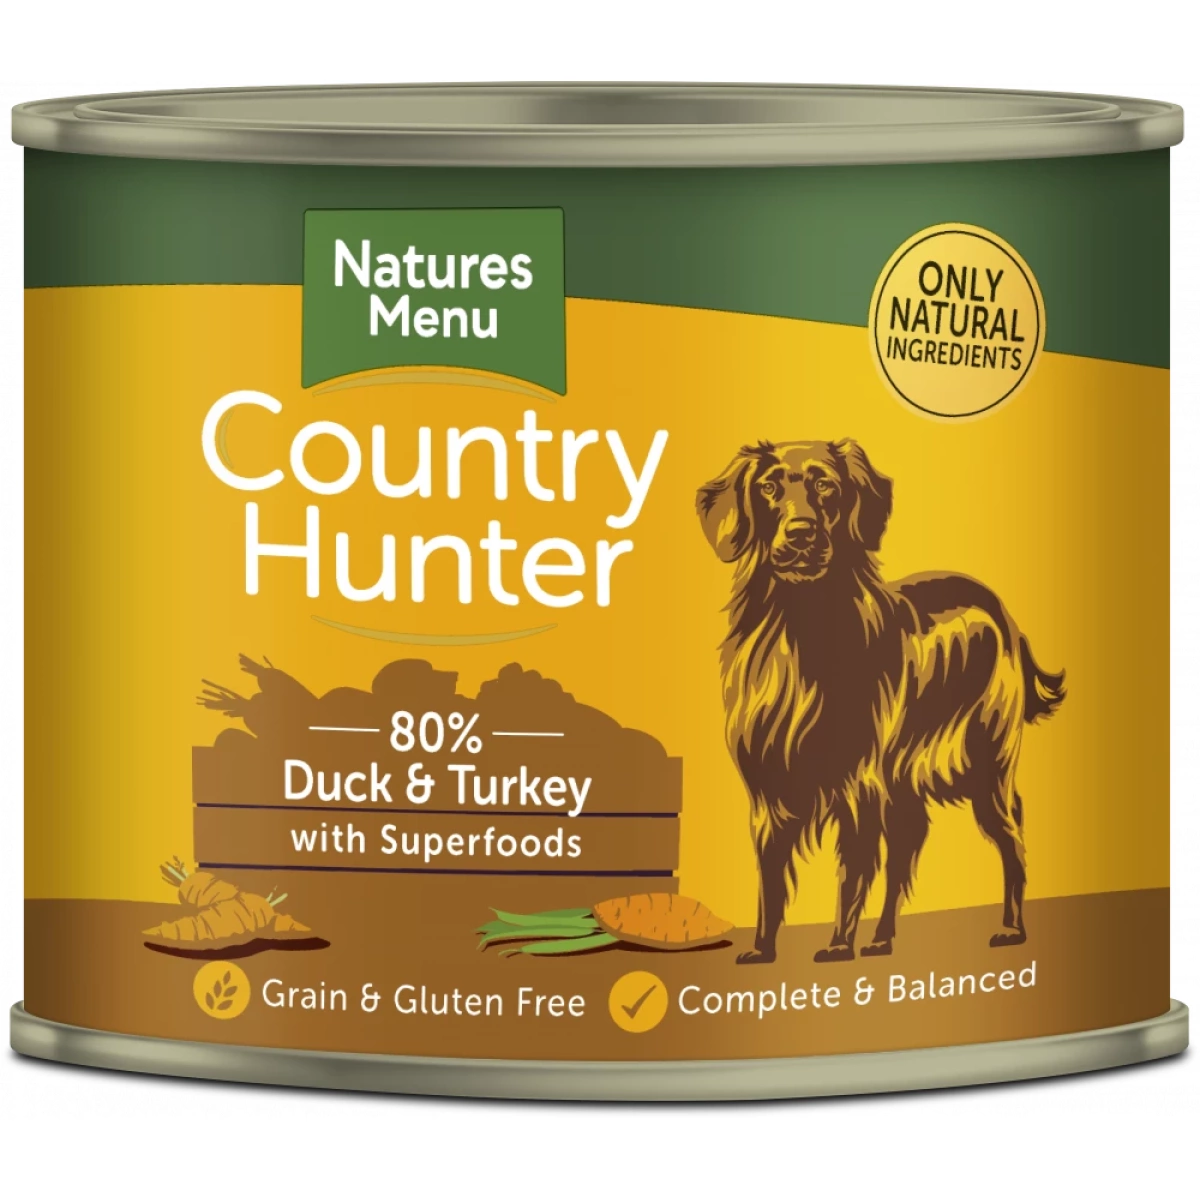 Country Hunter 80% Duck & Turkey 600g – Pawfect Supplies Ltd Product Image